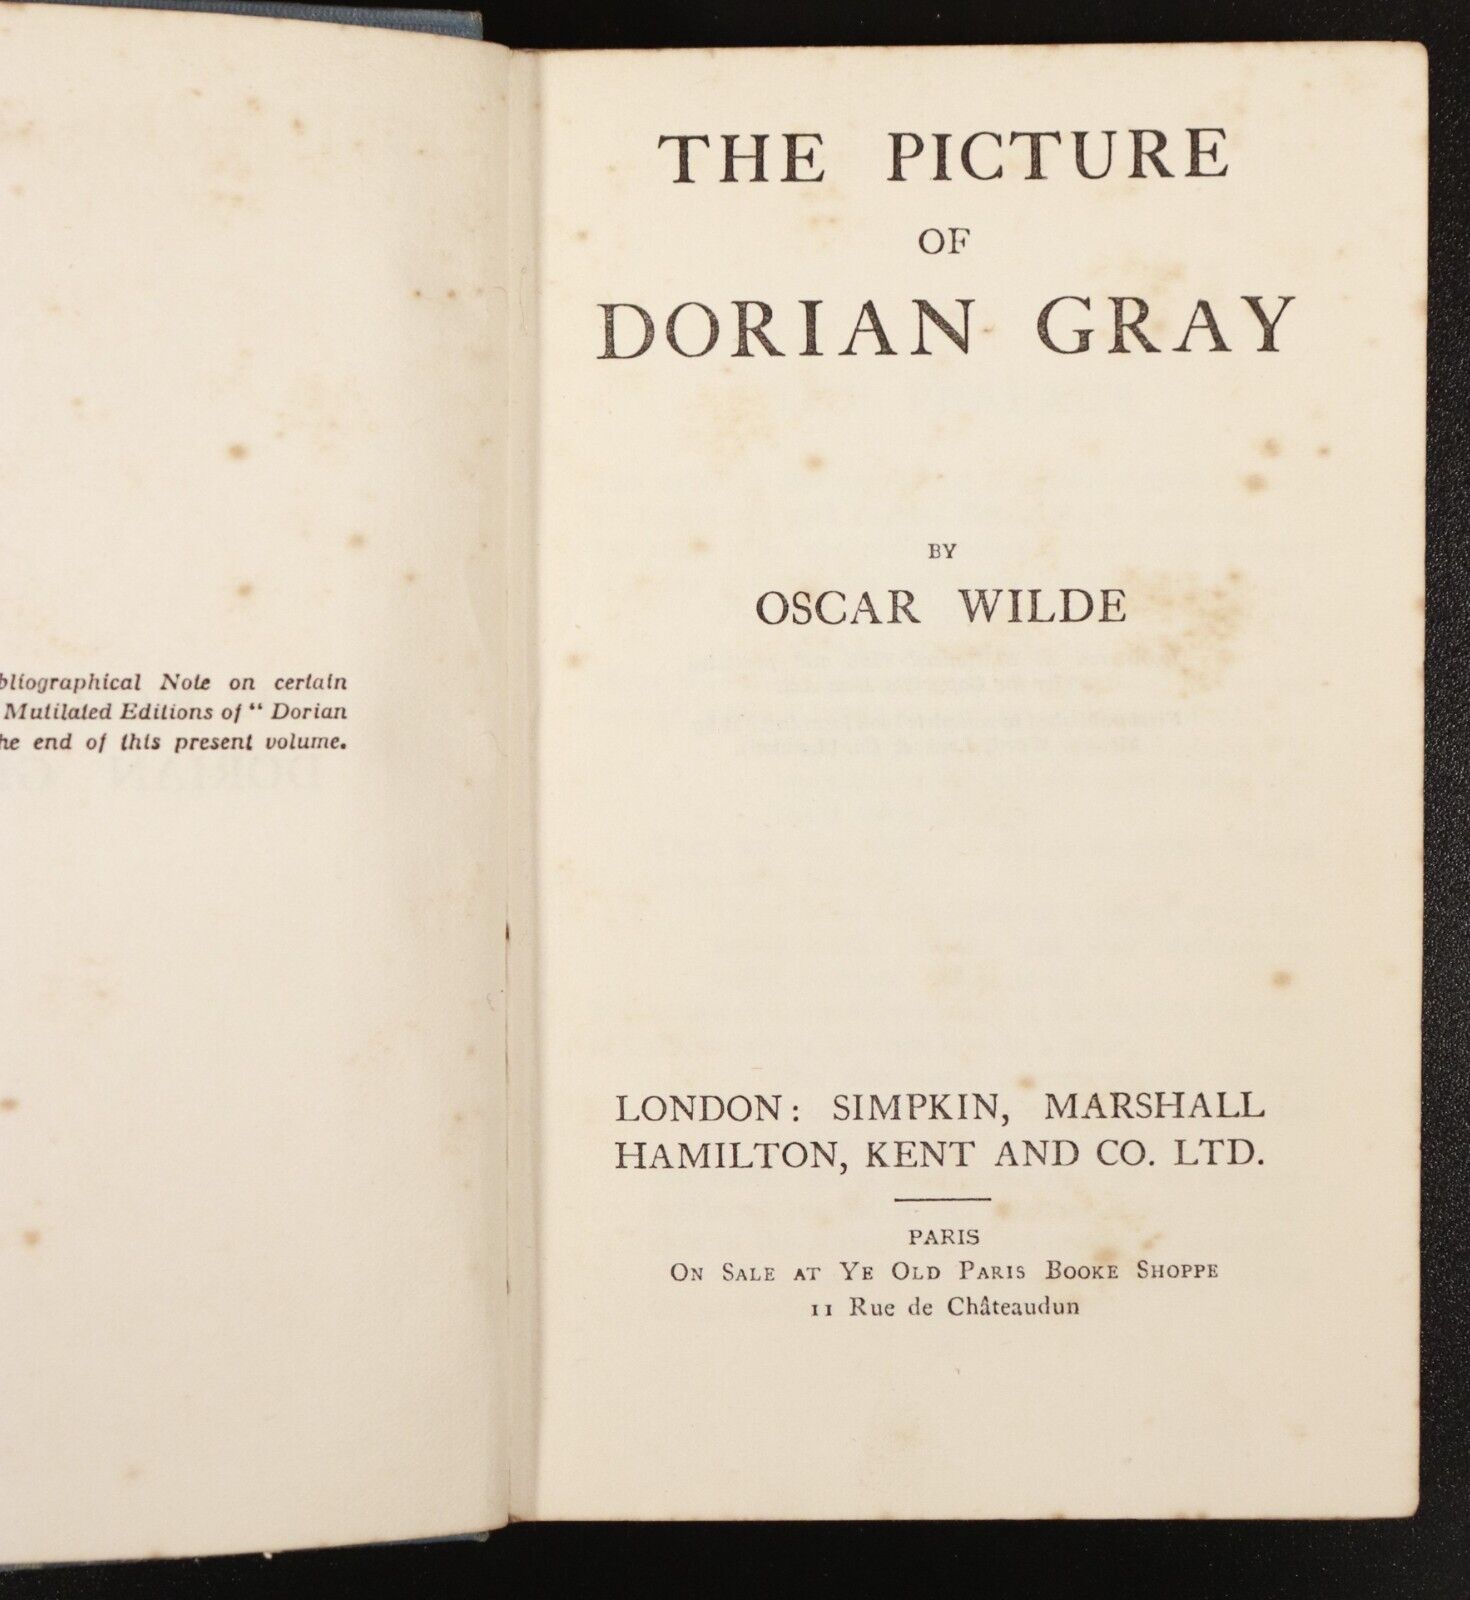 c1910 The Picture Of Dorian Gray by Oscar Wilde Antique Classic Literature Book - 0